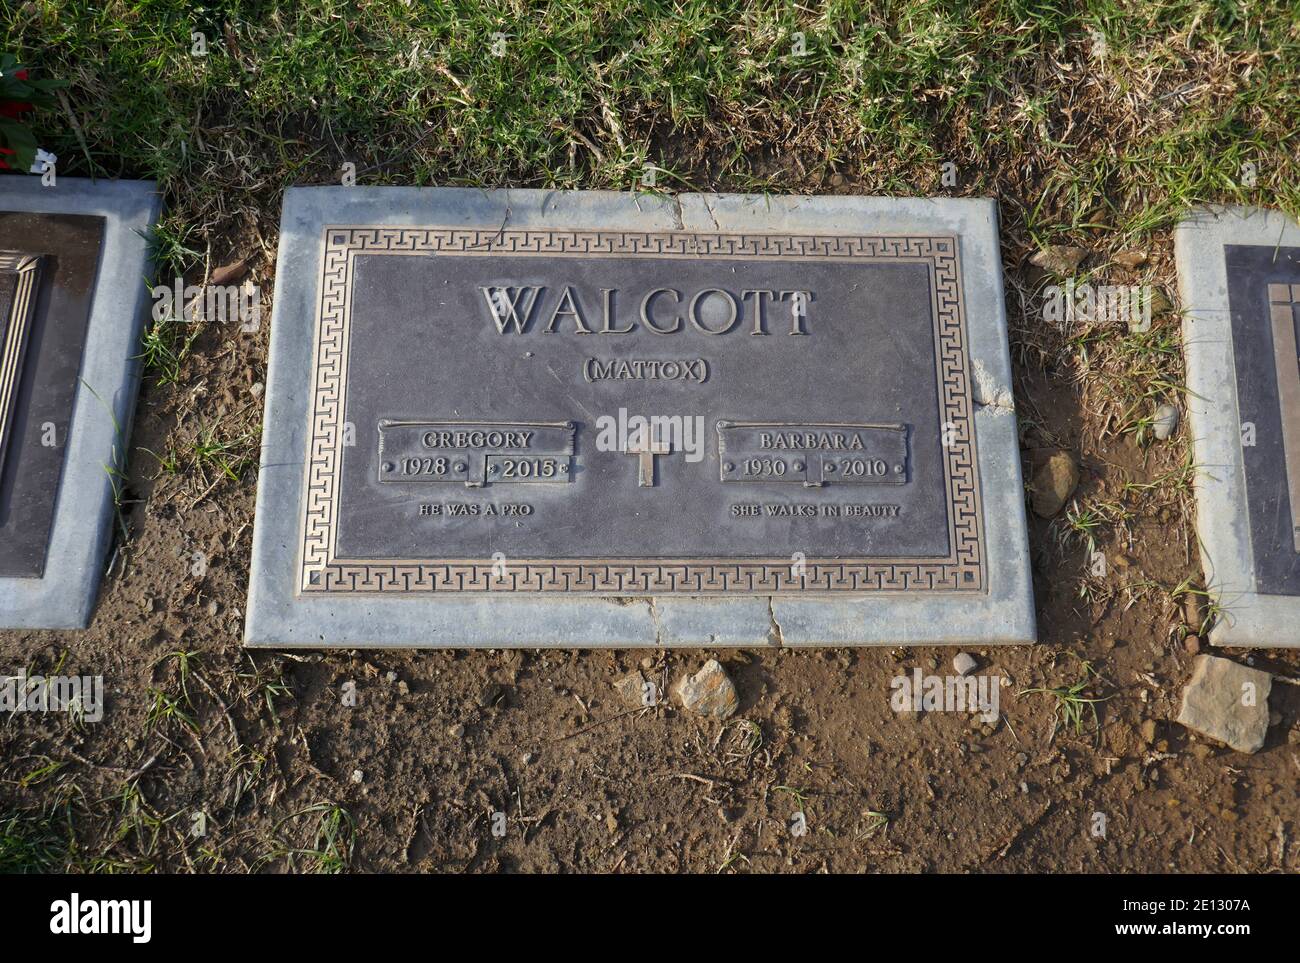 Chatsworth, California, USA 3rd January 2021 A general view of atmosphere of actor Gregory Walcott's Grave at Oakwood Memorial Park and Cemetery on January 3, 2021 in Chatsworth, California, USA. Photo by Barry King/Alamy Stock Photo Stock Photo